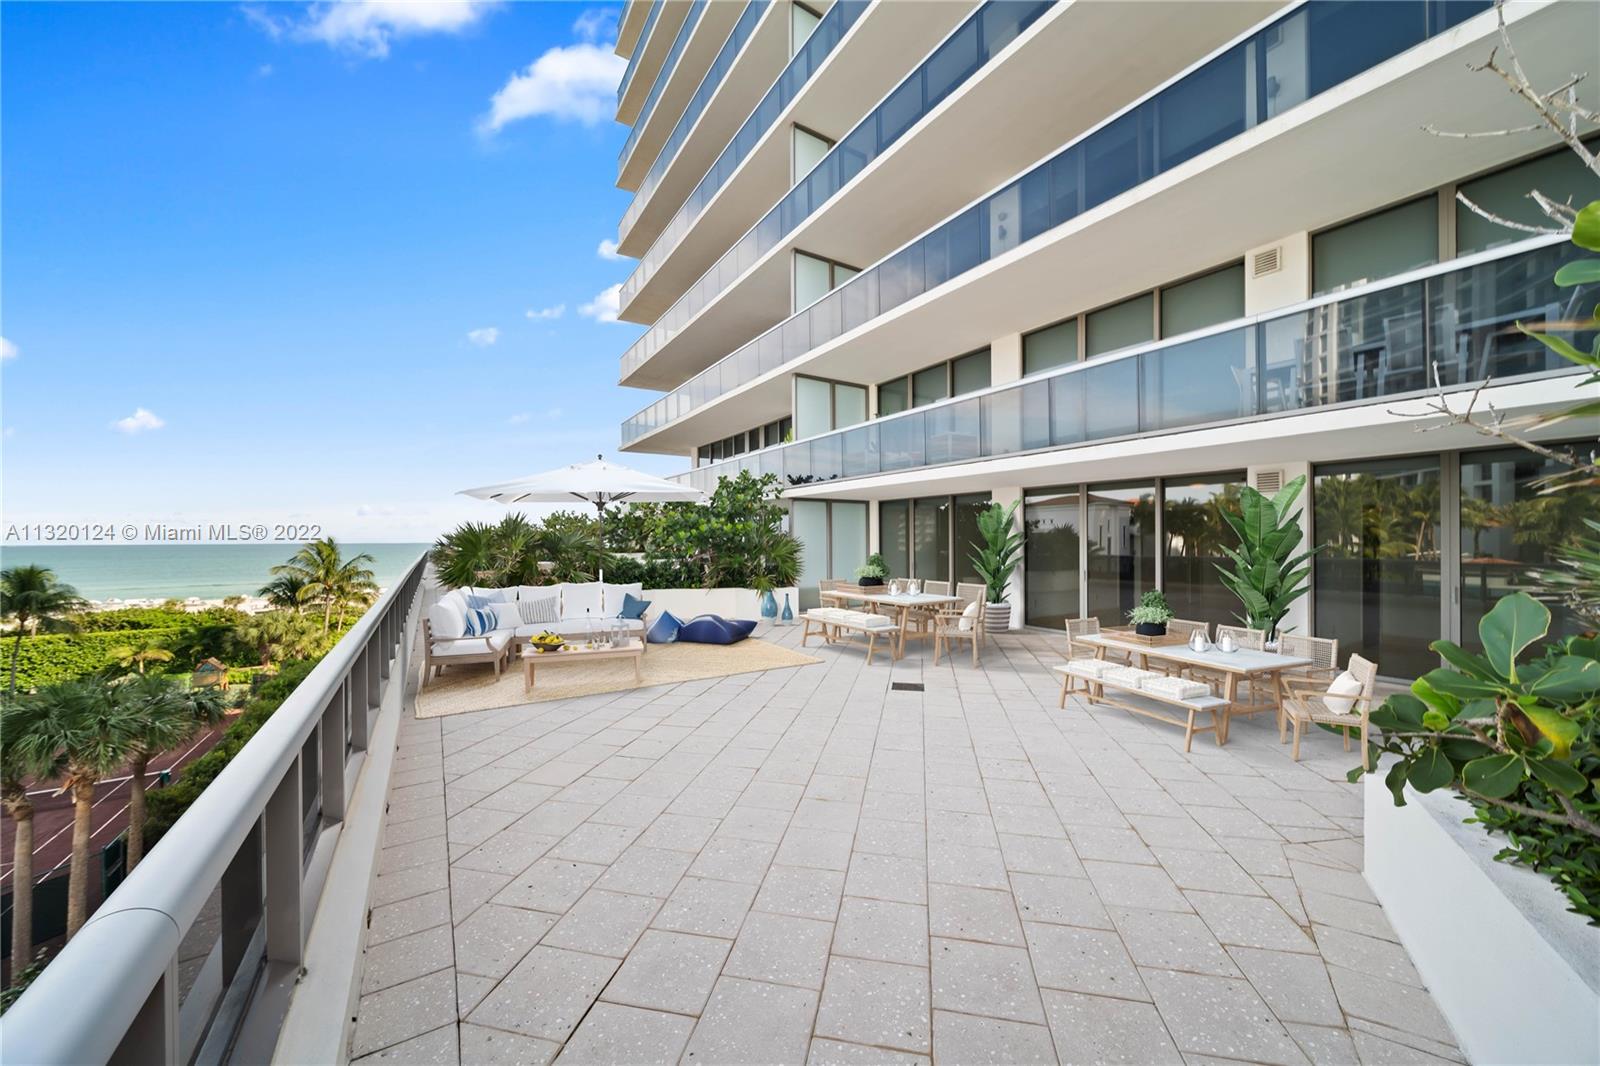 This stunning waterfront unit has floor to ceiling windows leading out onto a 1,000+ sf private terrace, filling the unit with natural light and making it feel very spacious. Enjoy 2 bedrooms, each with their own bathroom plus an additional half bathroom. The primary bedroom features a walk-in closet. The water heater was recently replaced with a tankless heater, opening up additional closet space. The unit has in-unit laundry tucked away in a discreet closet. The Mei has recently renovated to keep up with its superior standards. The building has a relaxed, zen feel and truly feels like you're at a 5-star resort. The gorgeous pool and garden area opens up onto the Miami Beach boardwalk, giving you direct beach access. Enjoy exceptional, beachfront resort living with a huge private terrace.